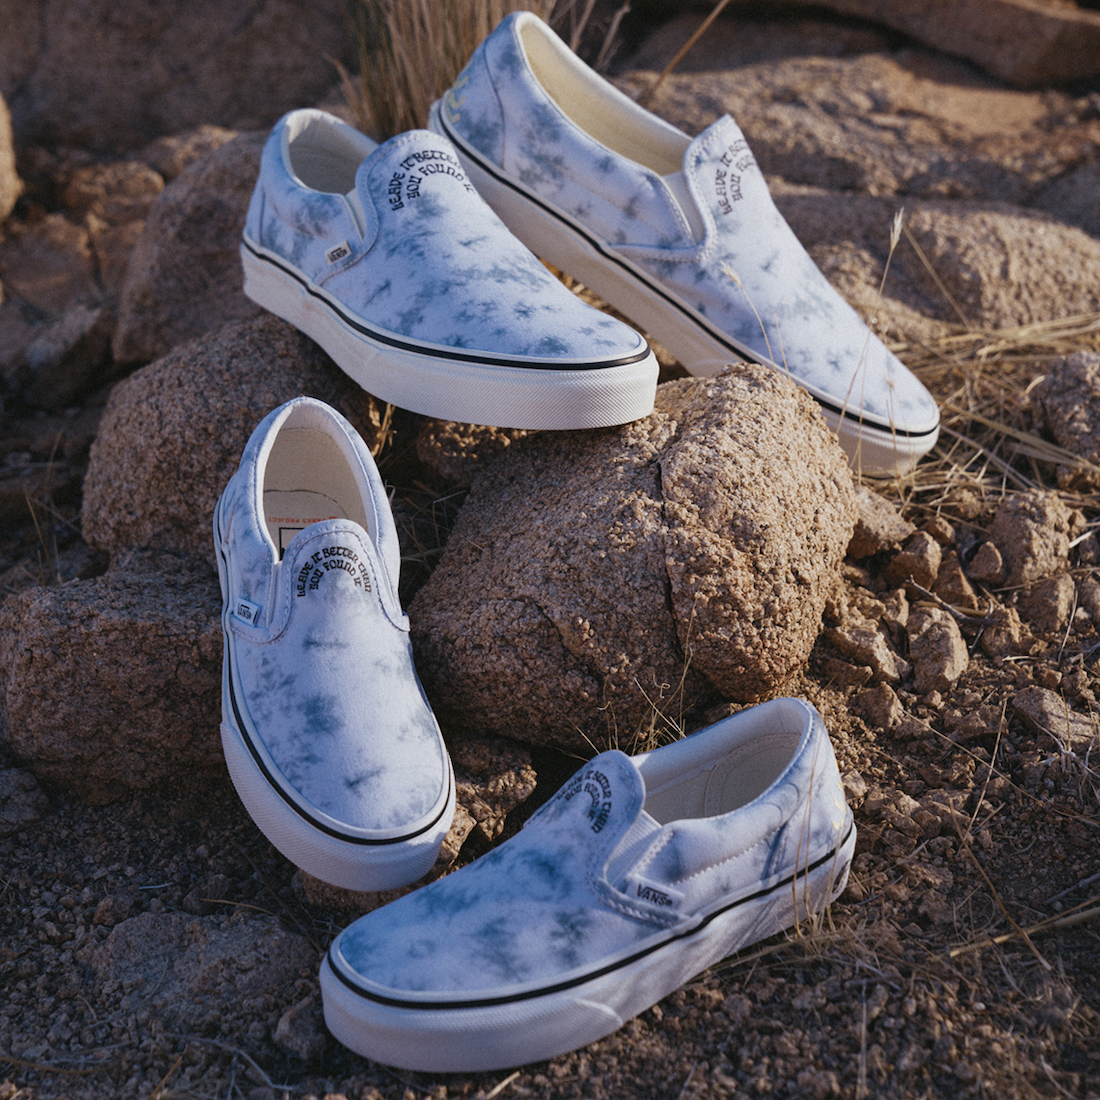 Parks Project Vans Collection Release Date